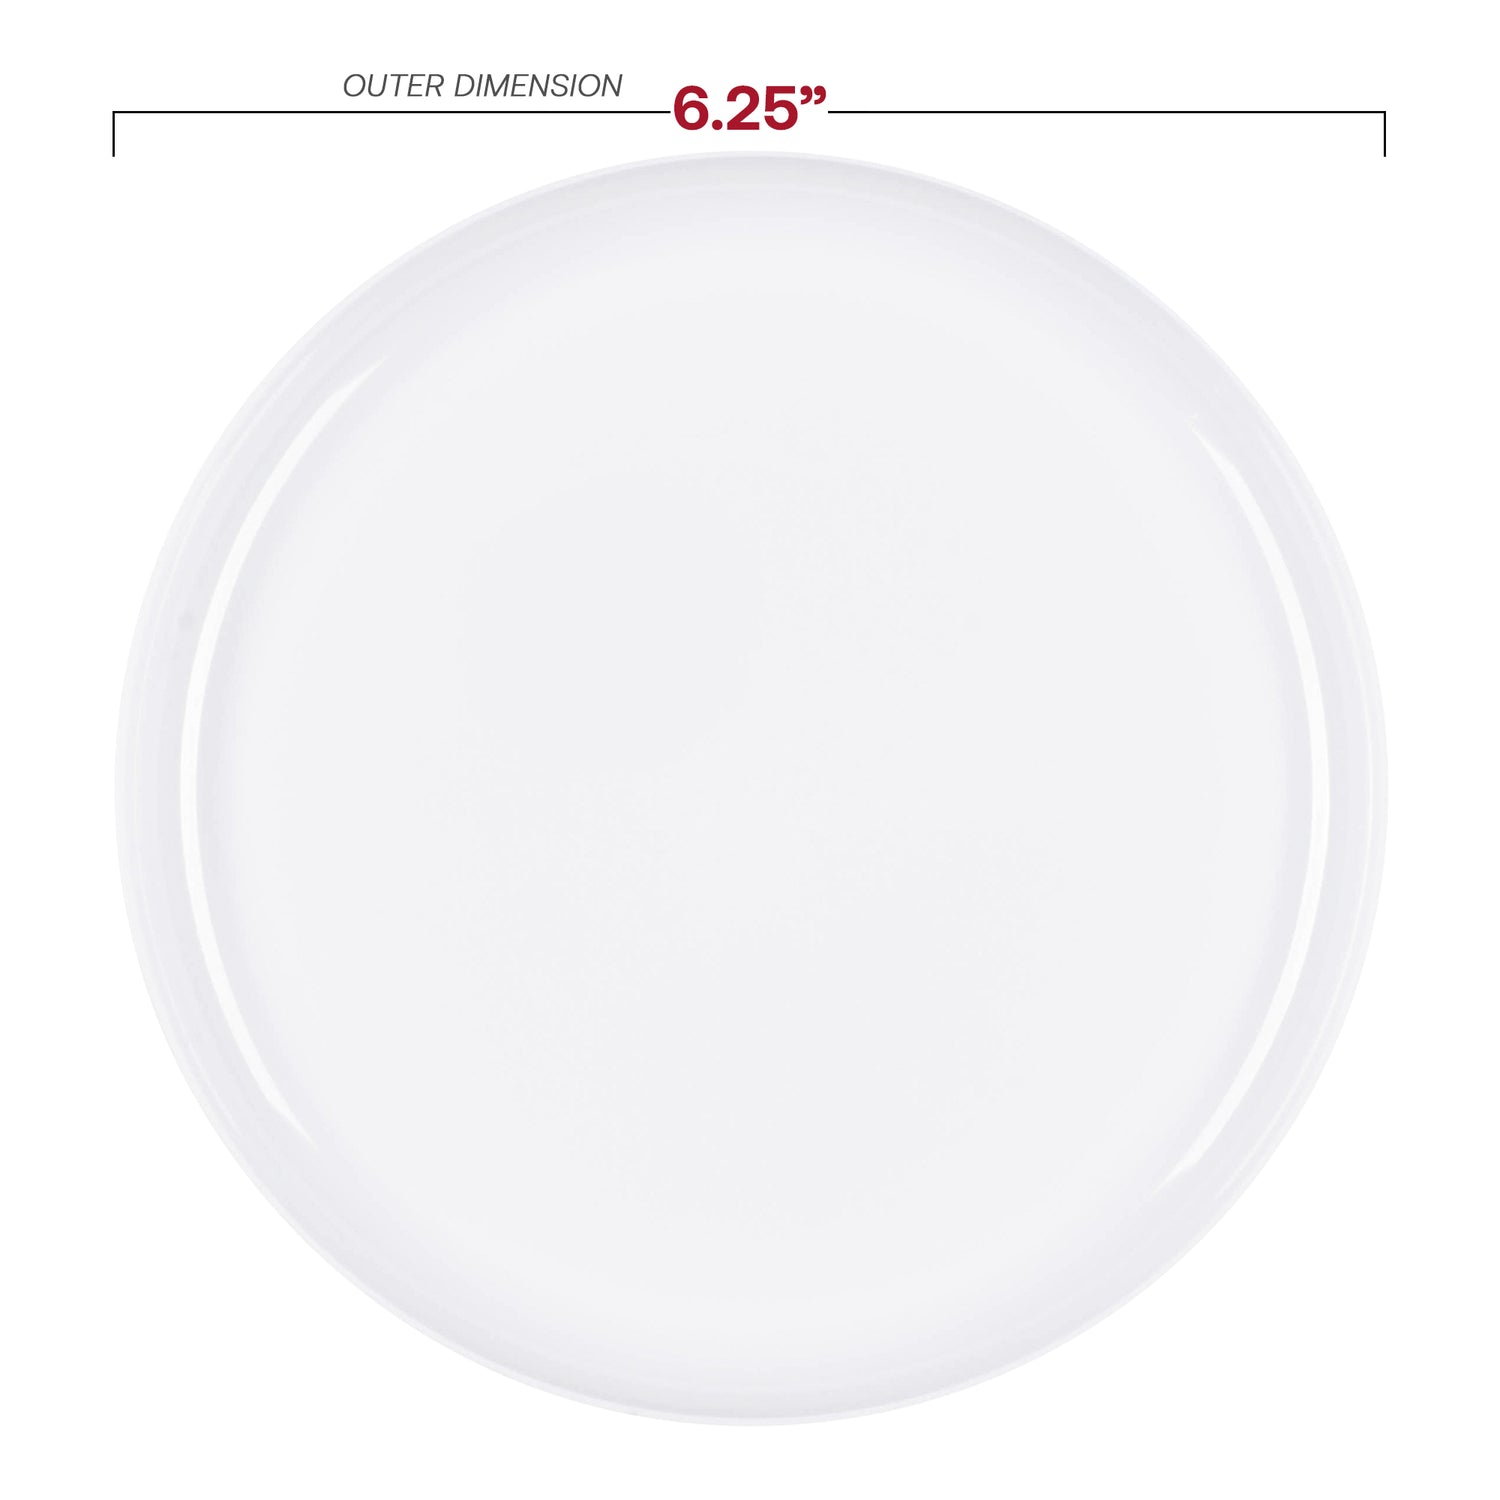 White Flat Round Disposable Plastic Pastry Plates (6.25") Dimension | The Kaya Collection